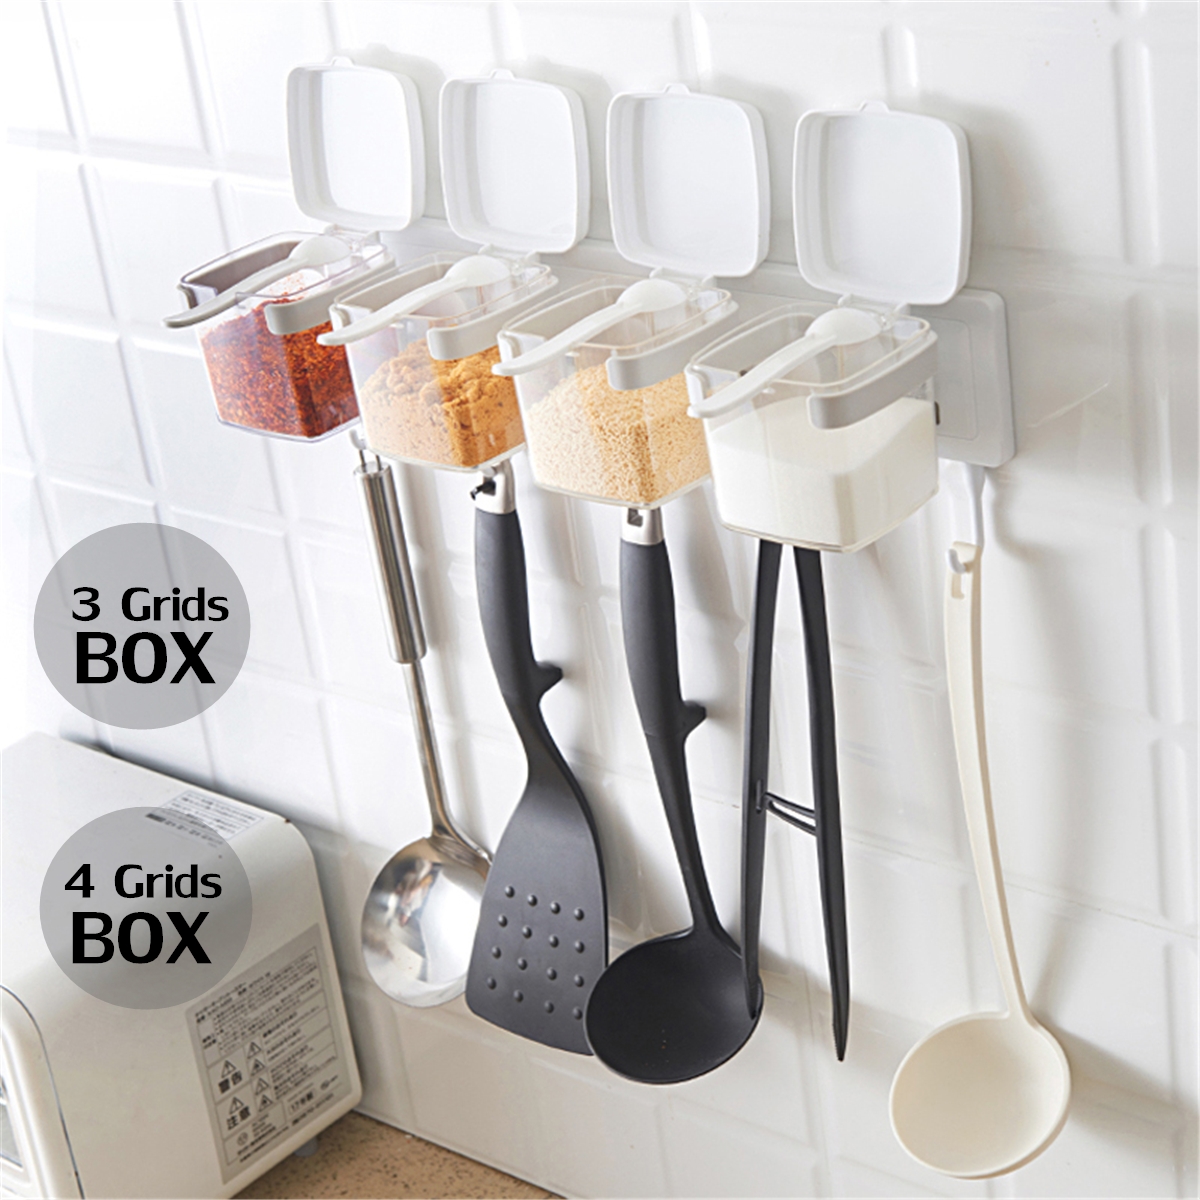 34-Grids-Seasoning-Storage-Container-Kitchen-Wall-Hanging-Condiment-Spice-Holder-1631502-1